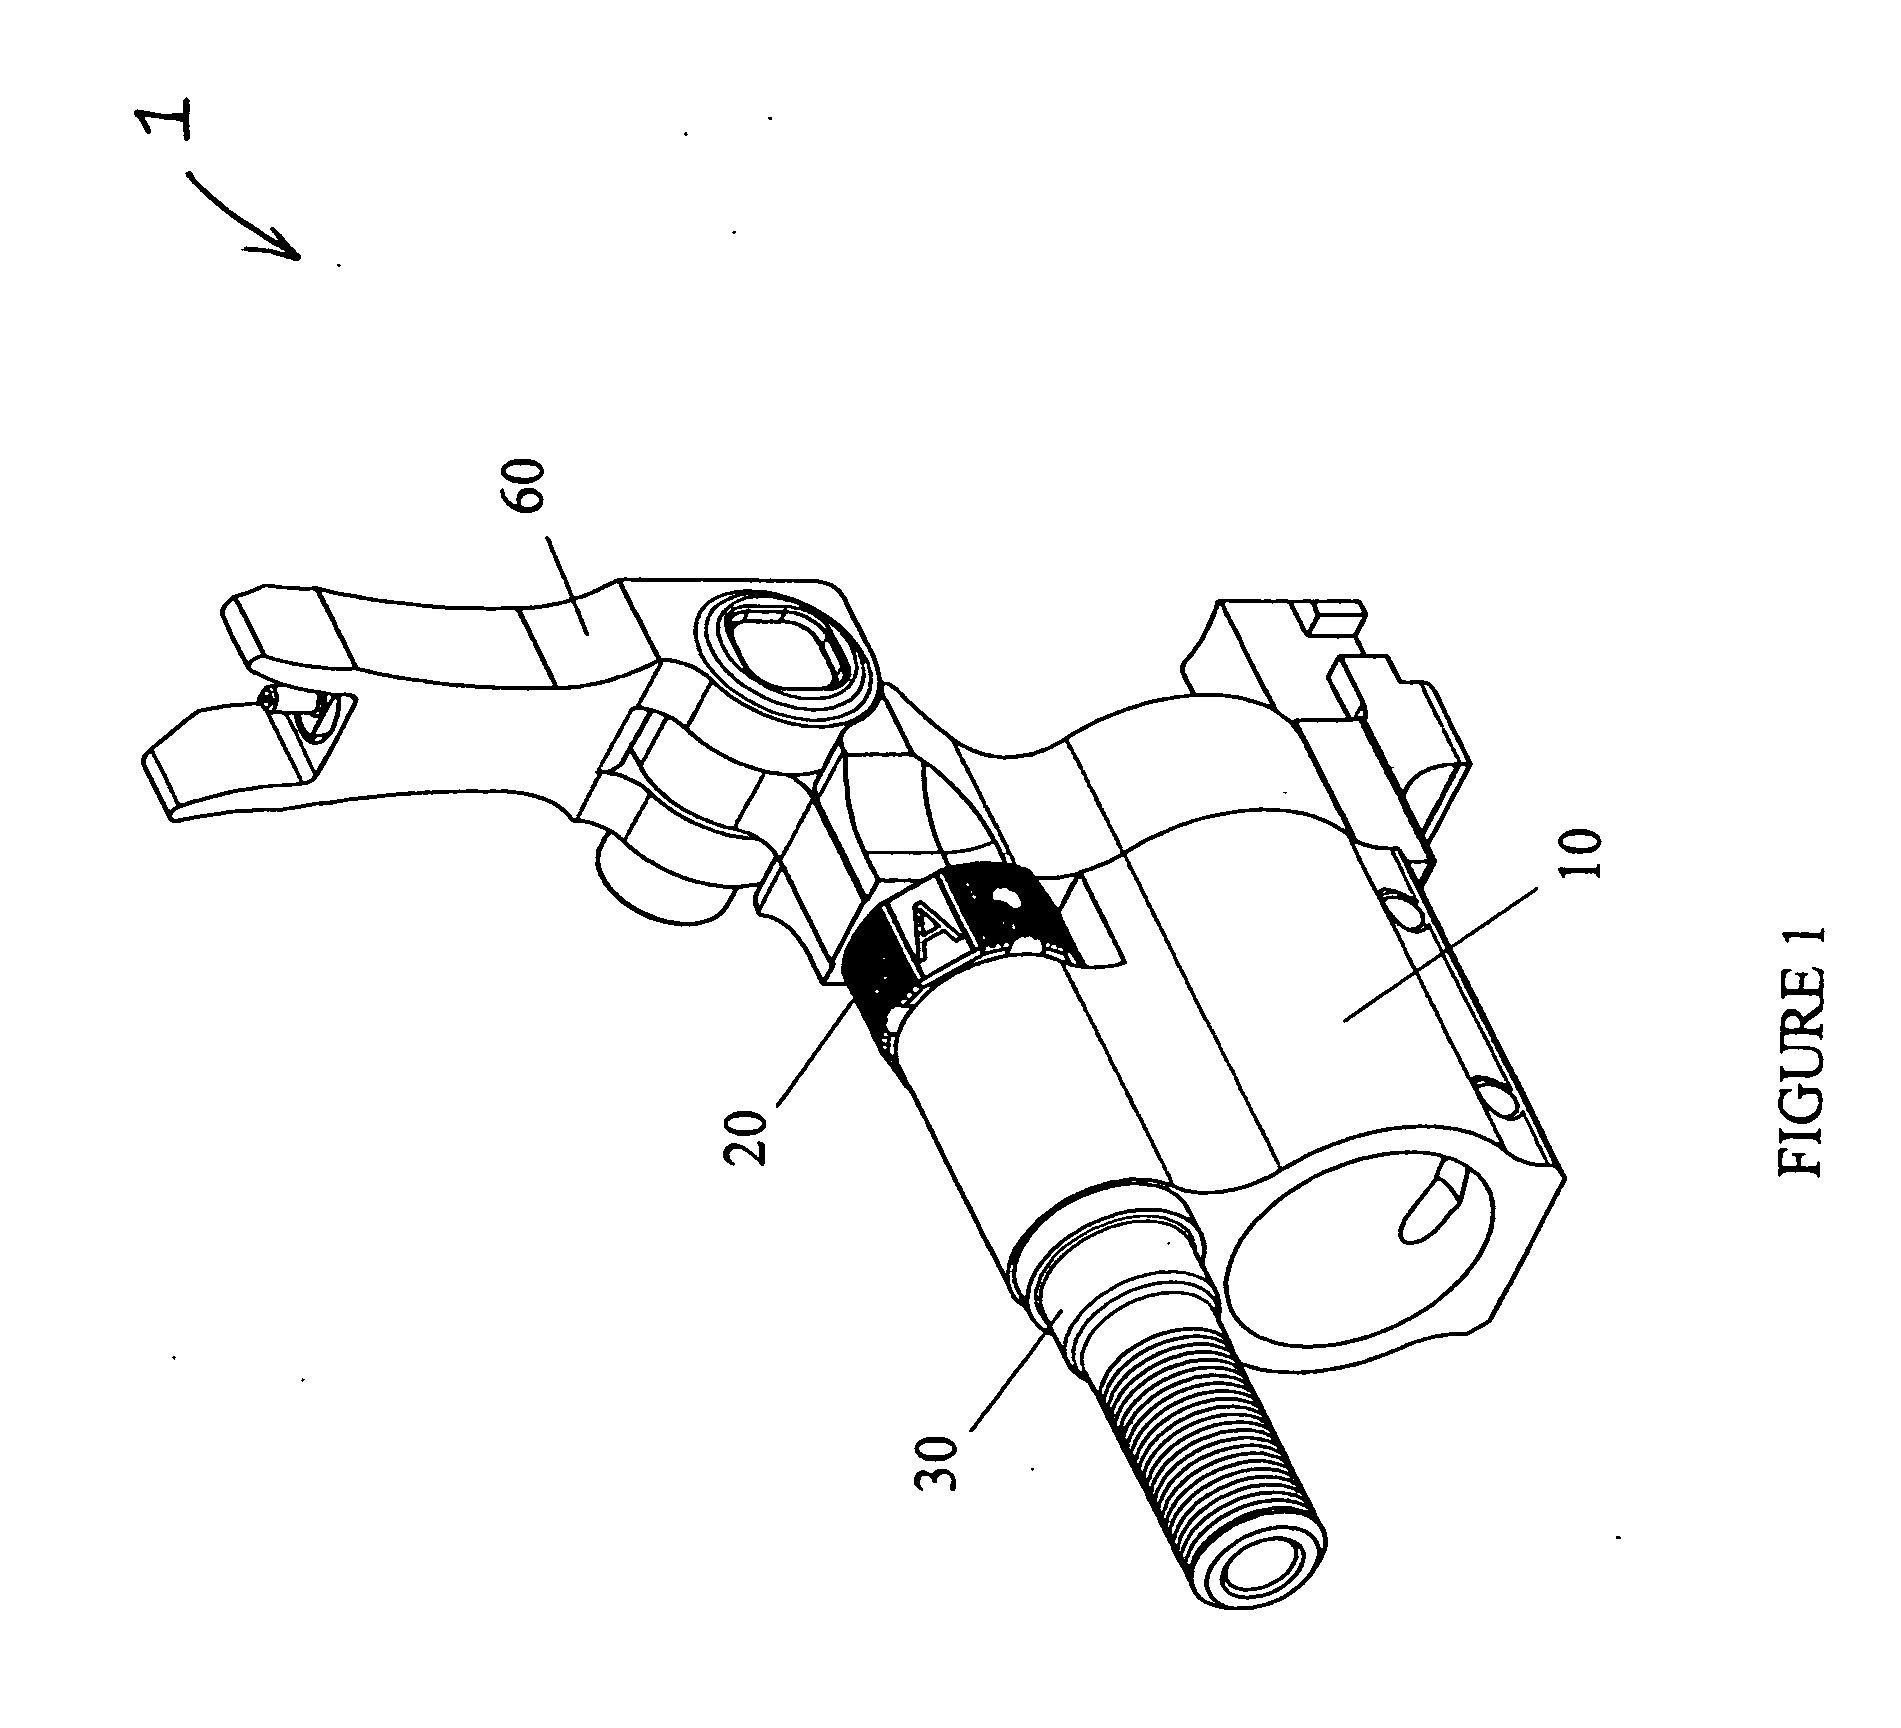 Adjustable gas block for an indirect gas operated firearm